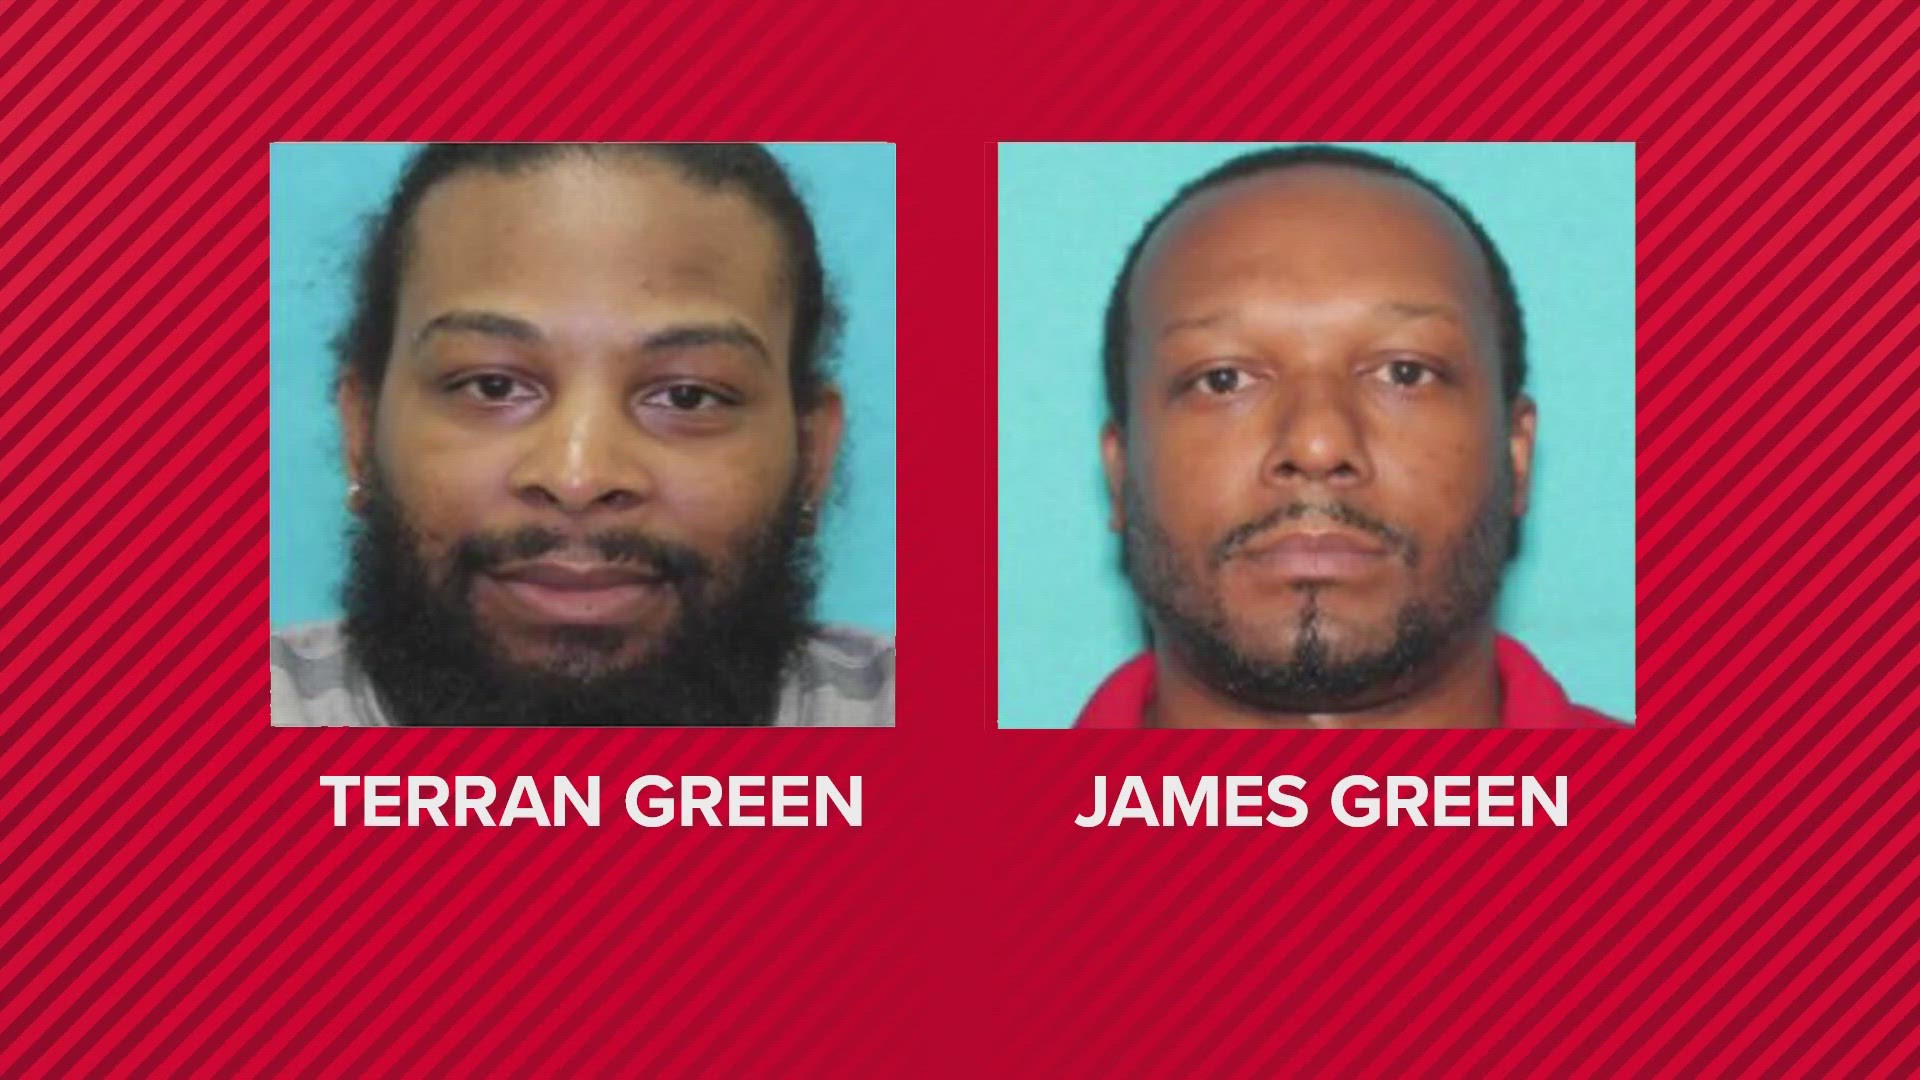 Authorities are searching for Terran Green, 34, and James Green, 37, in connection with the shooting of a Harris County deputy during a traffic stop.